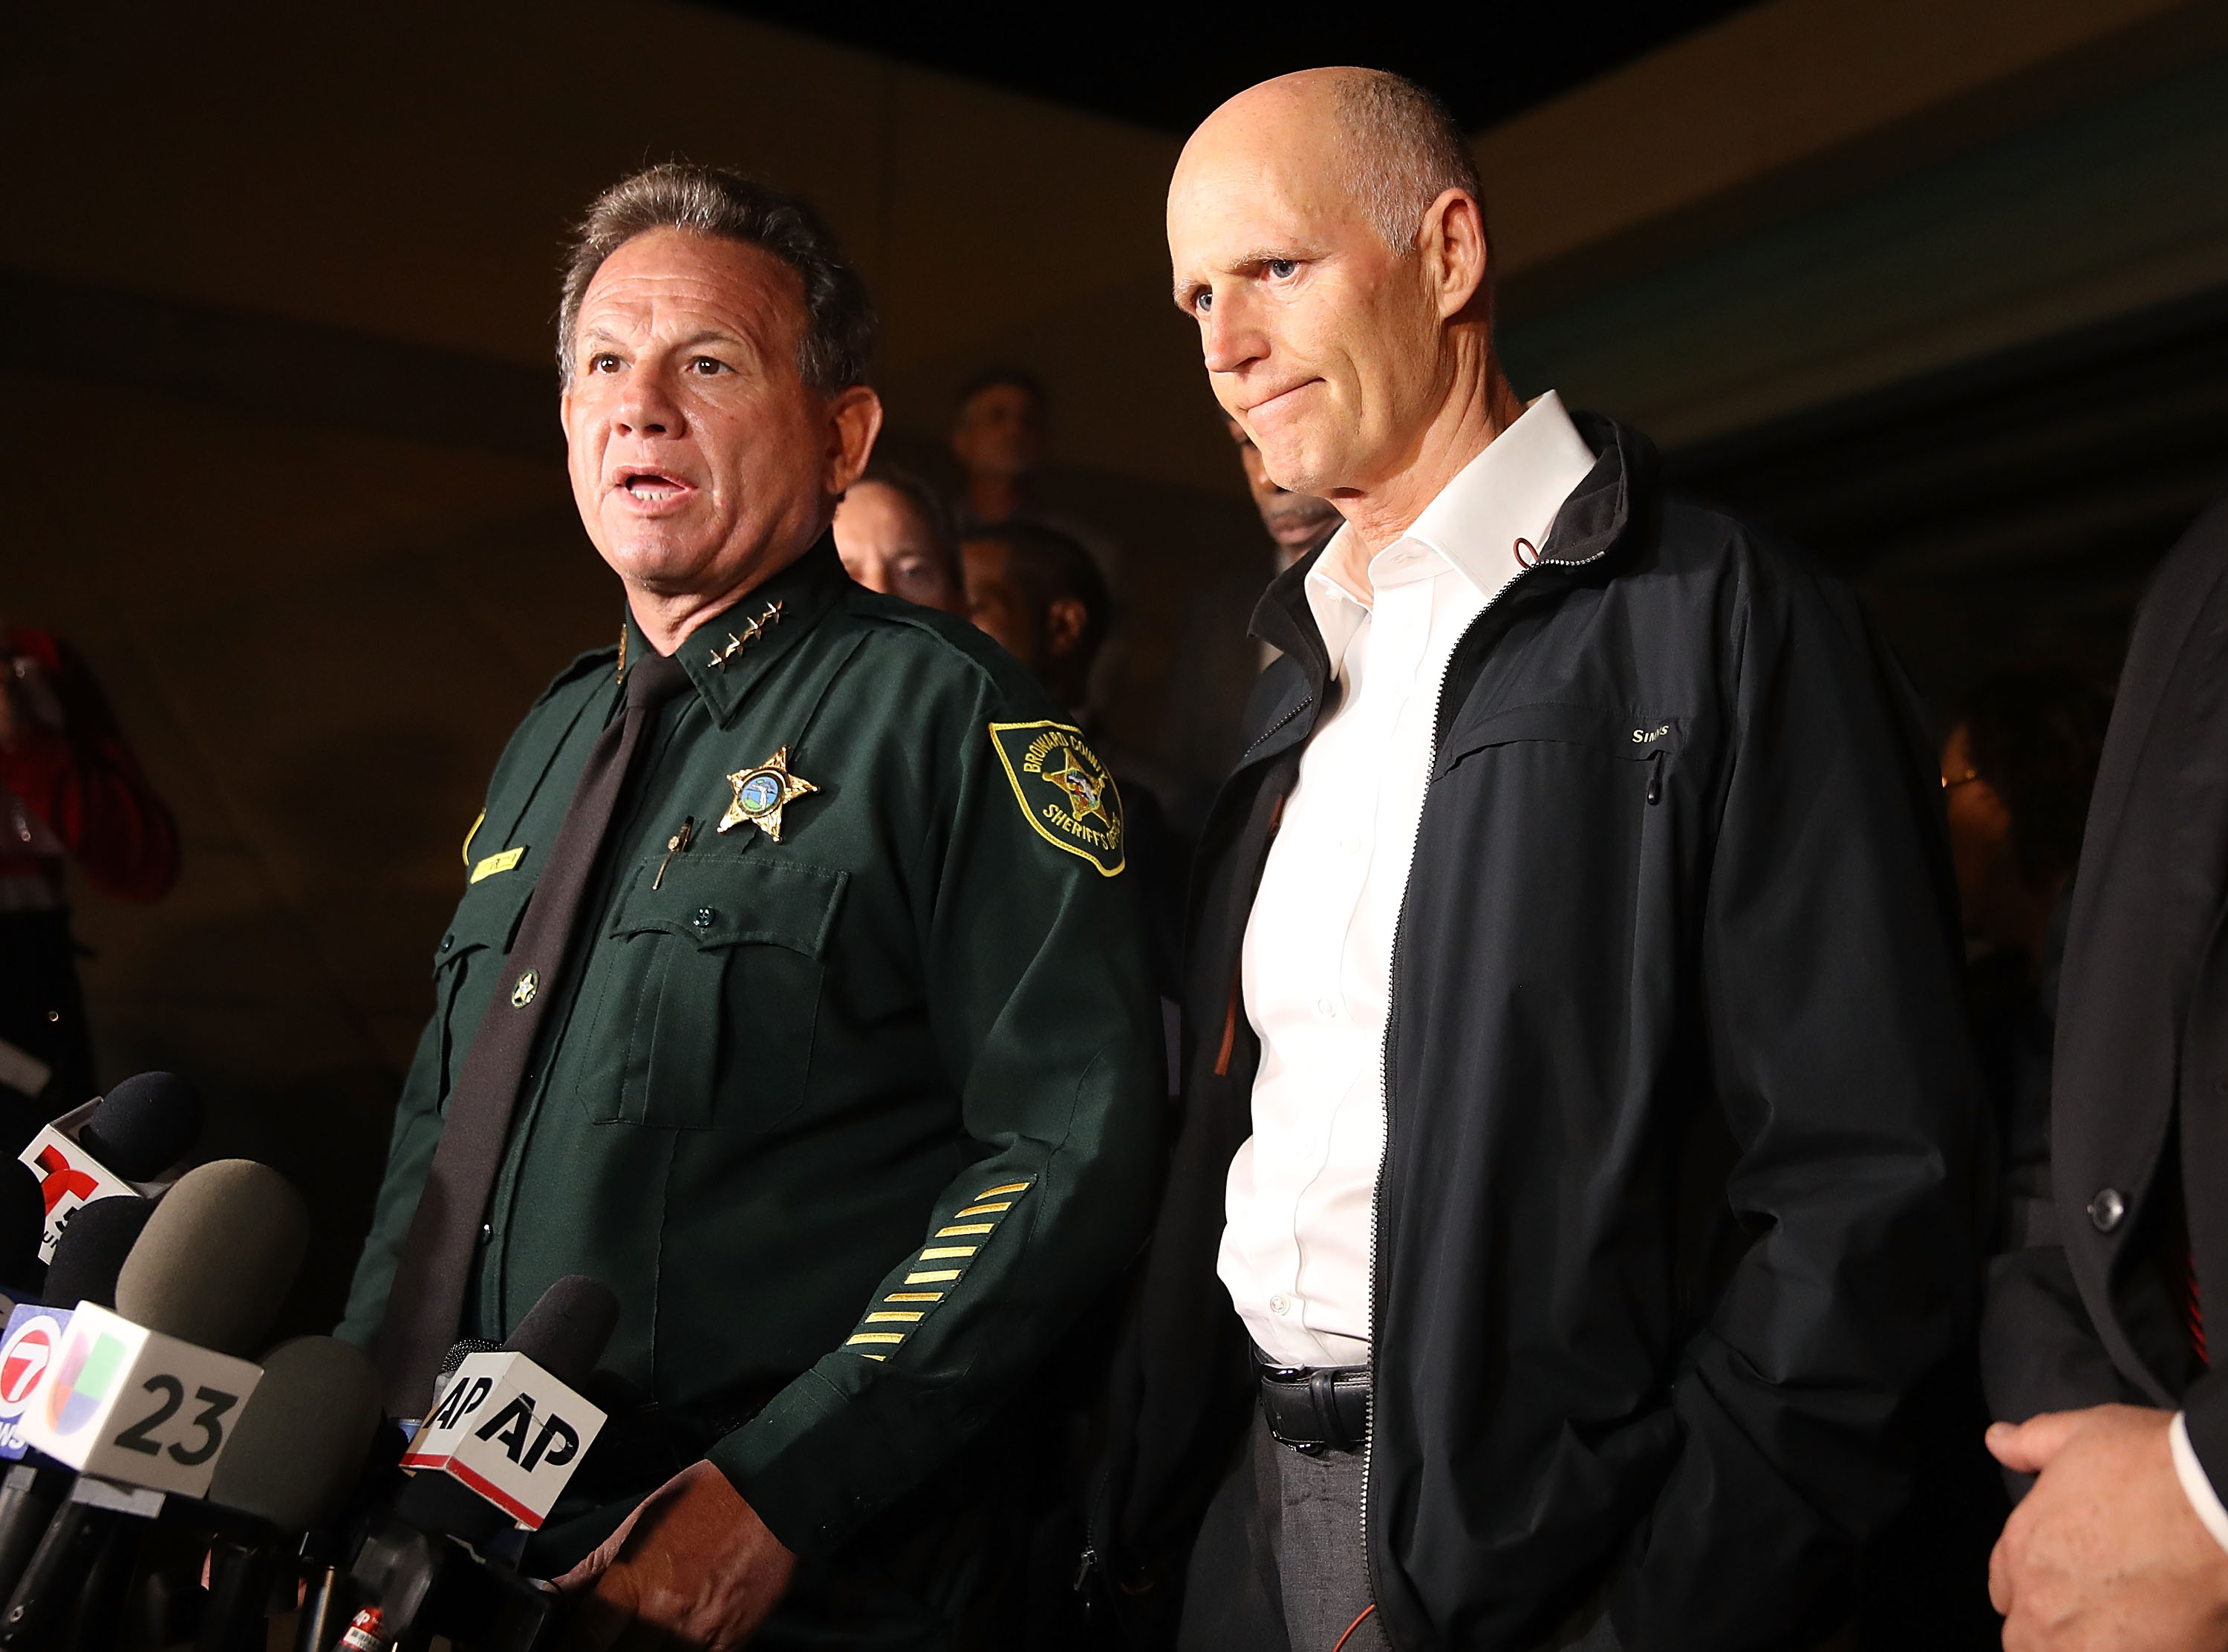 PARKLAND, FL - FEBRUARY 14: Scott Israel, Sheriff of Broward County, (L) and Florida Governor Rick Scott speak to the media as they visit Marjory Stoneman Douglas High School after a shooting at the school killed 17 people on February 14, 2018 in Parkland, Florida. Numerous law enforcement officials continue to investigate the scene. (Photo by Joe Raedle/Getty Images)